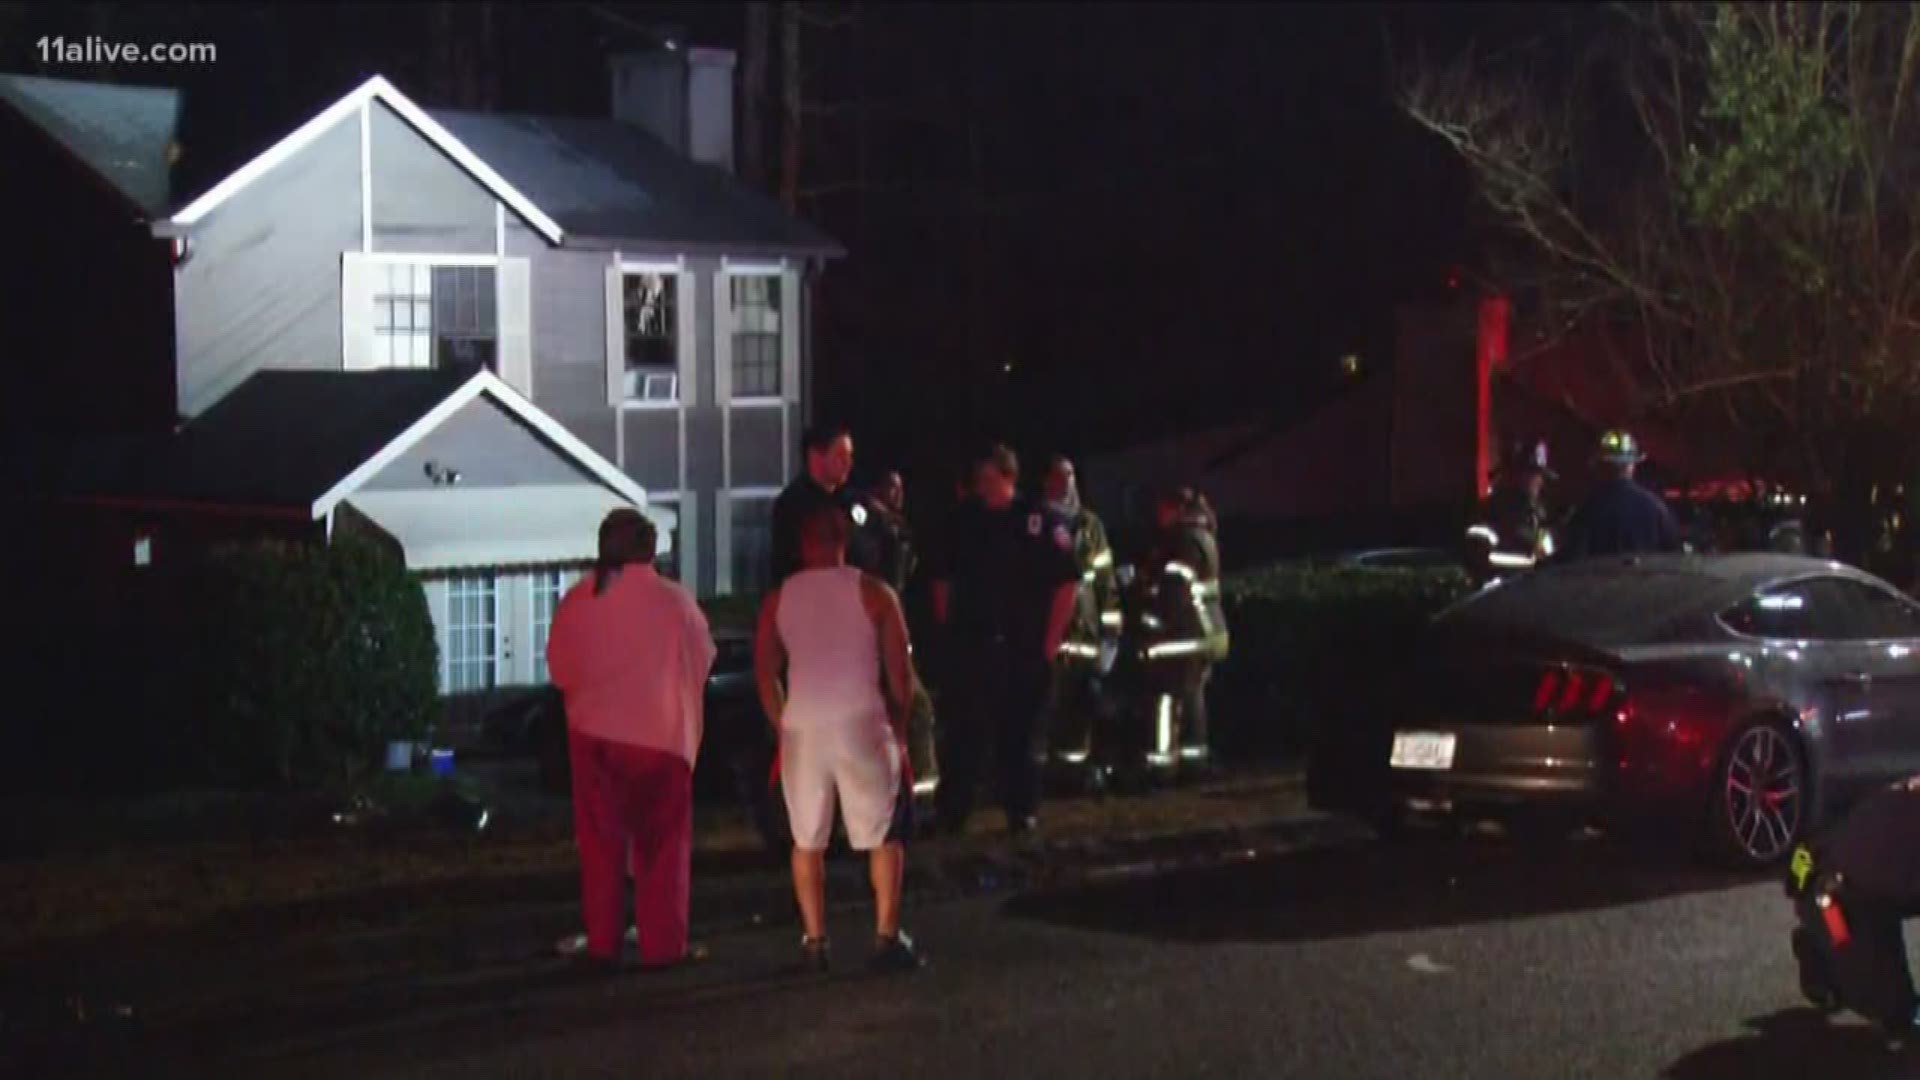 Fire officials have charged a man with arson in an overnight house fire off Creekford Drive.